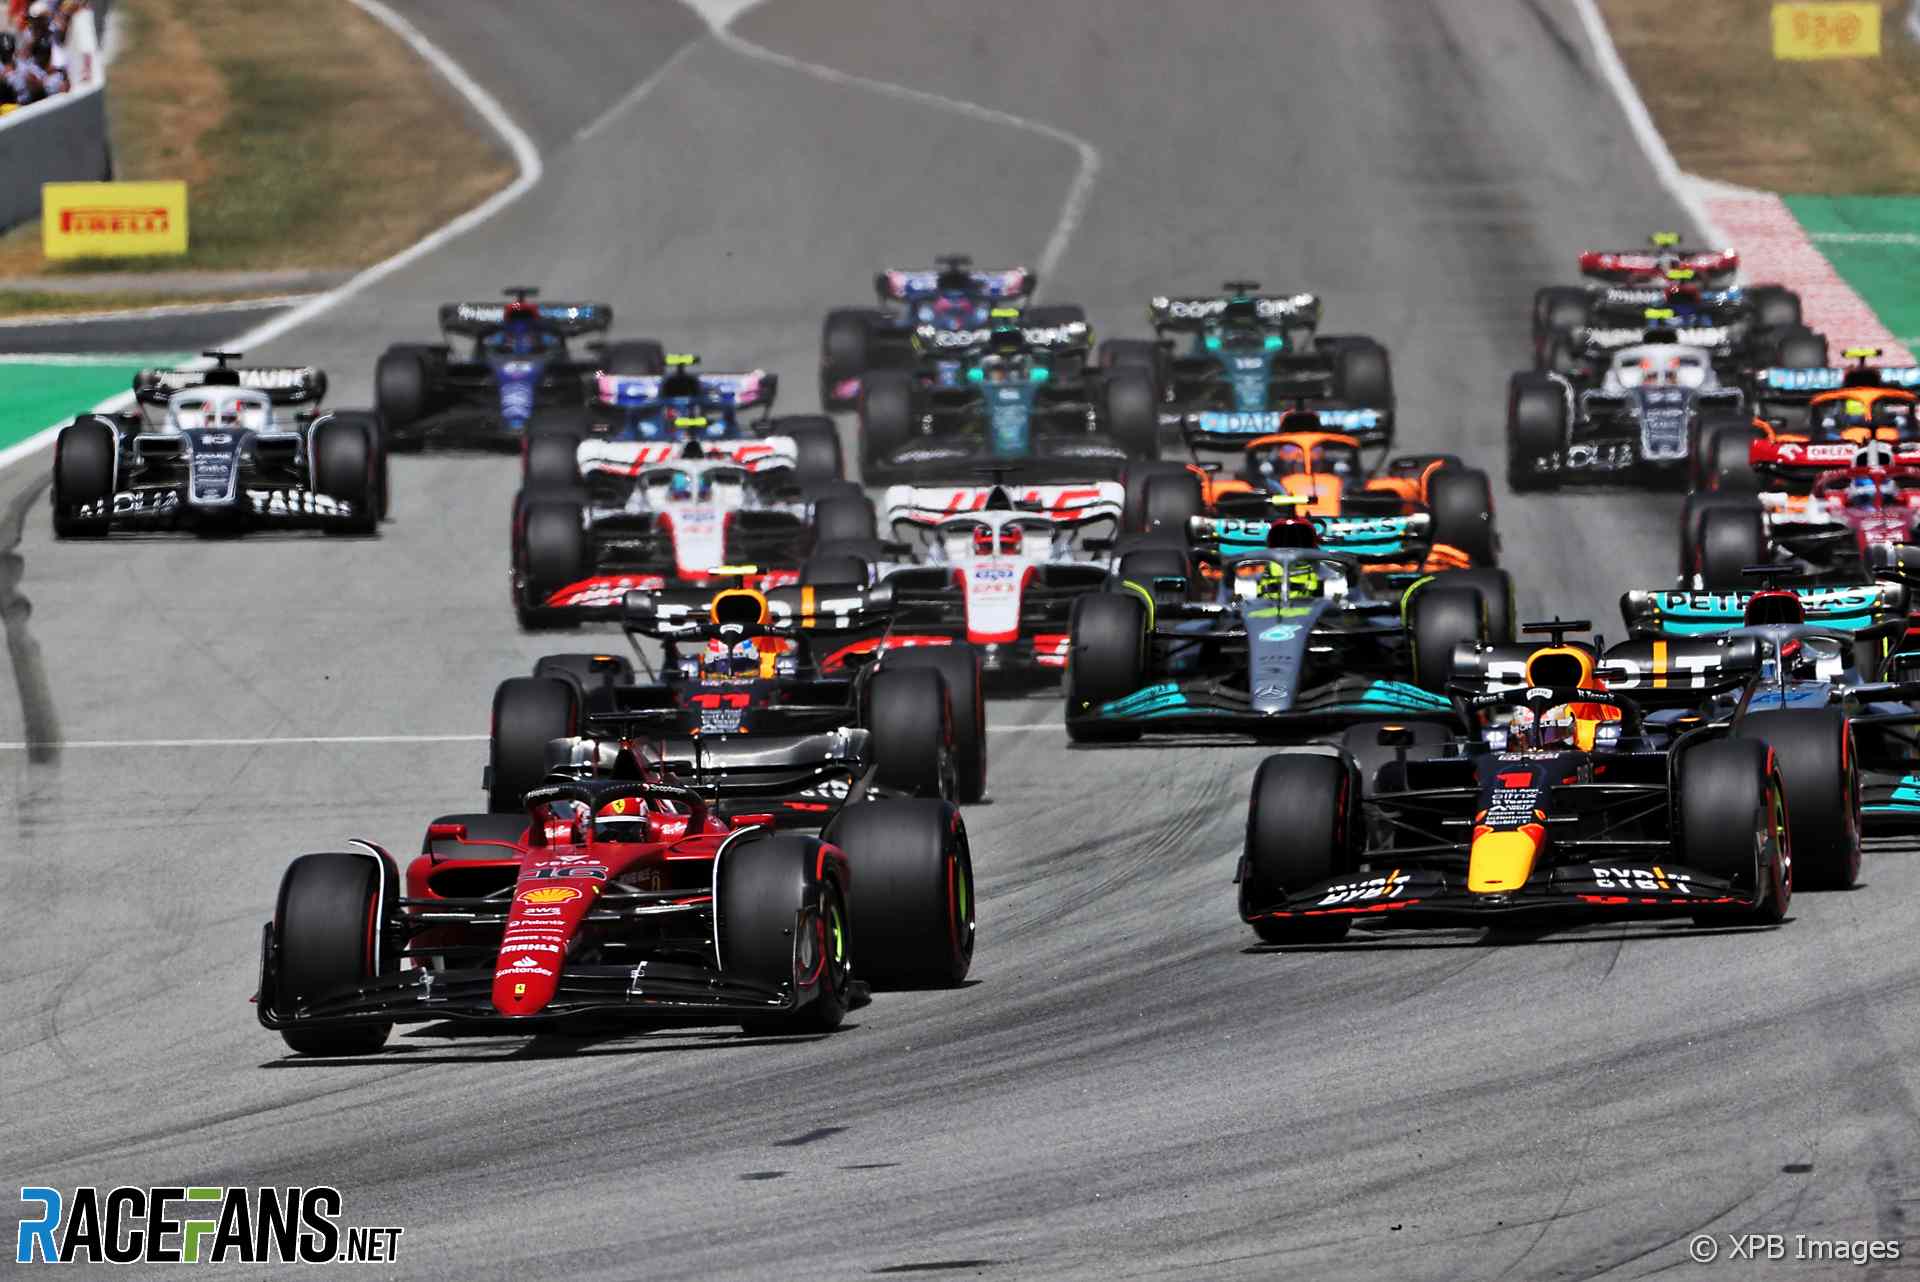 The 2022 Spanish Grand Prix was held at Circuit de Catalunya and won by Max Verstappen